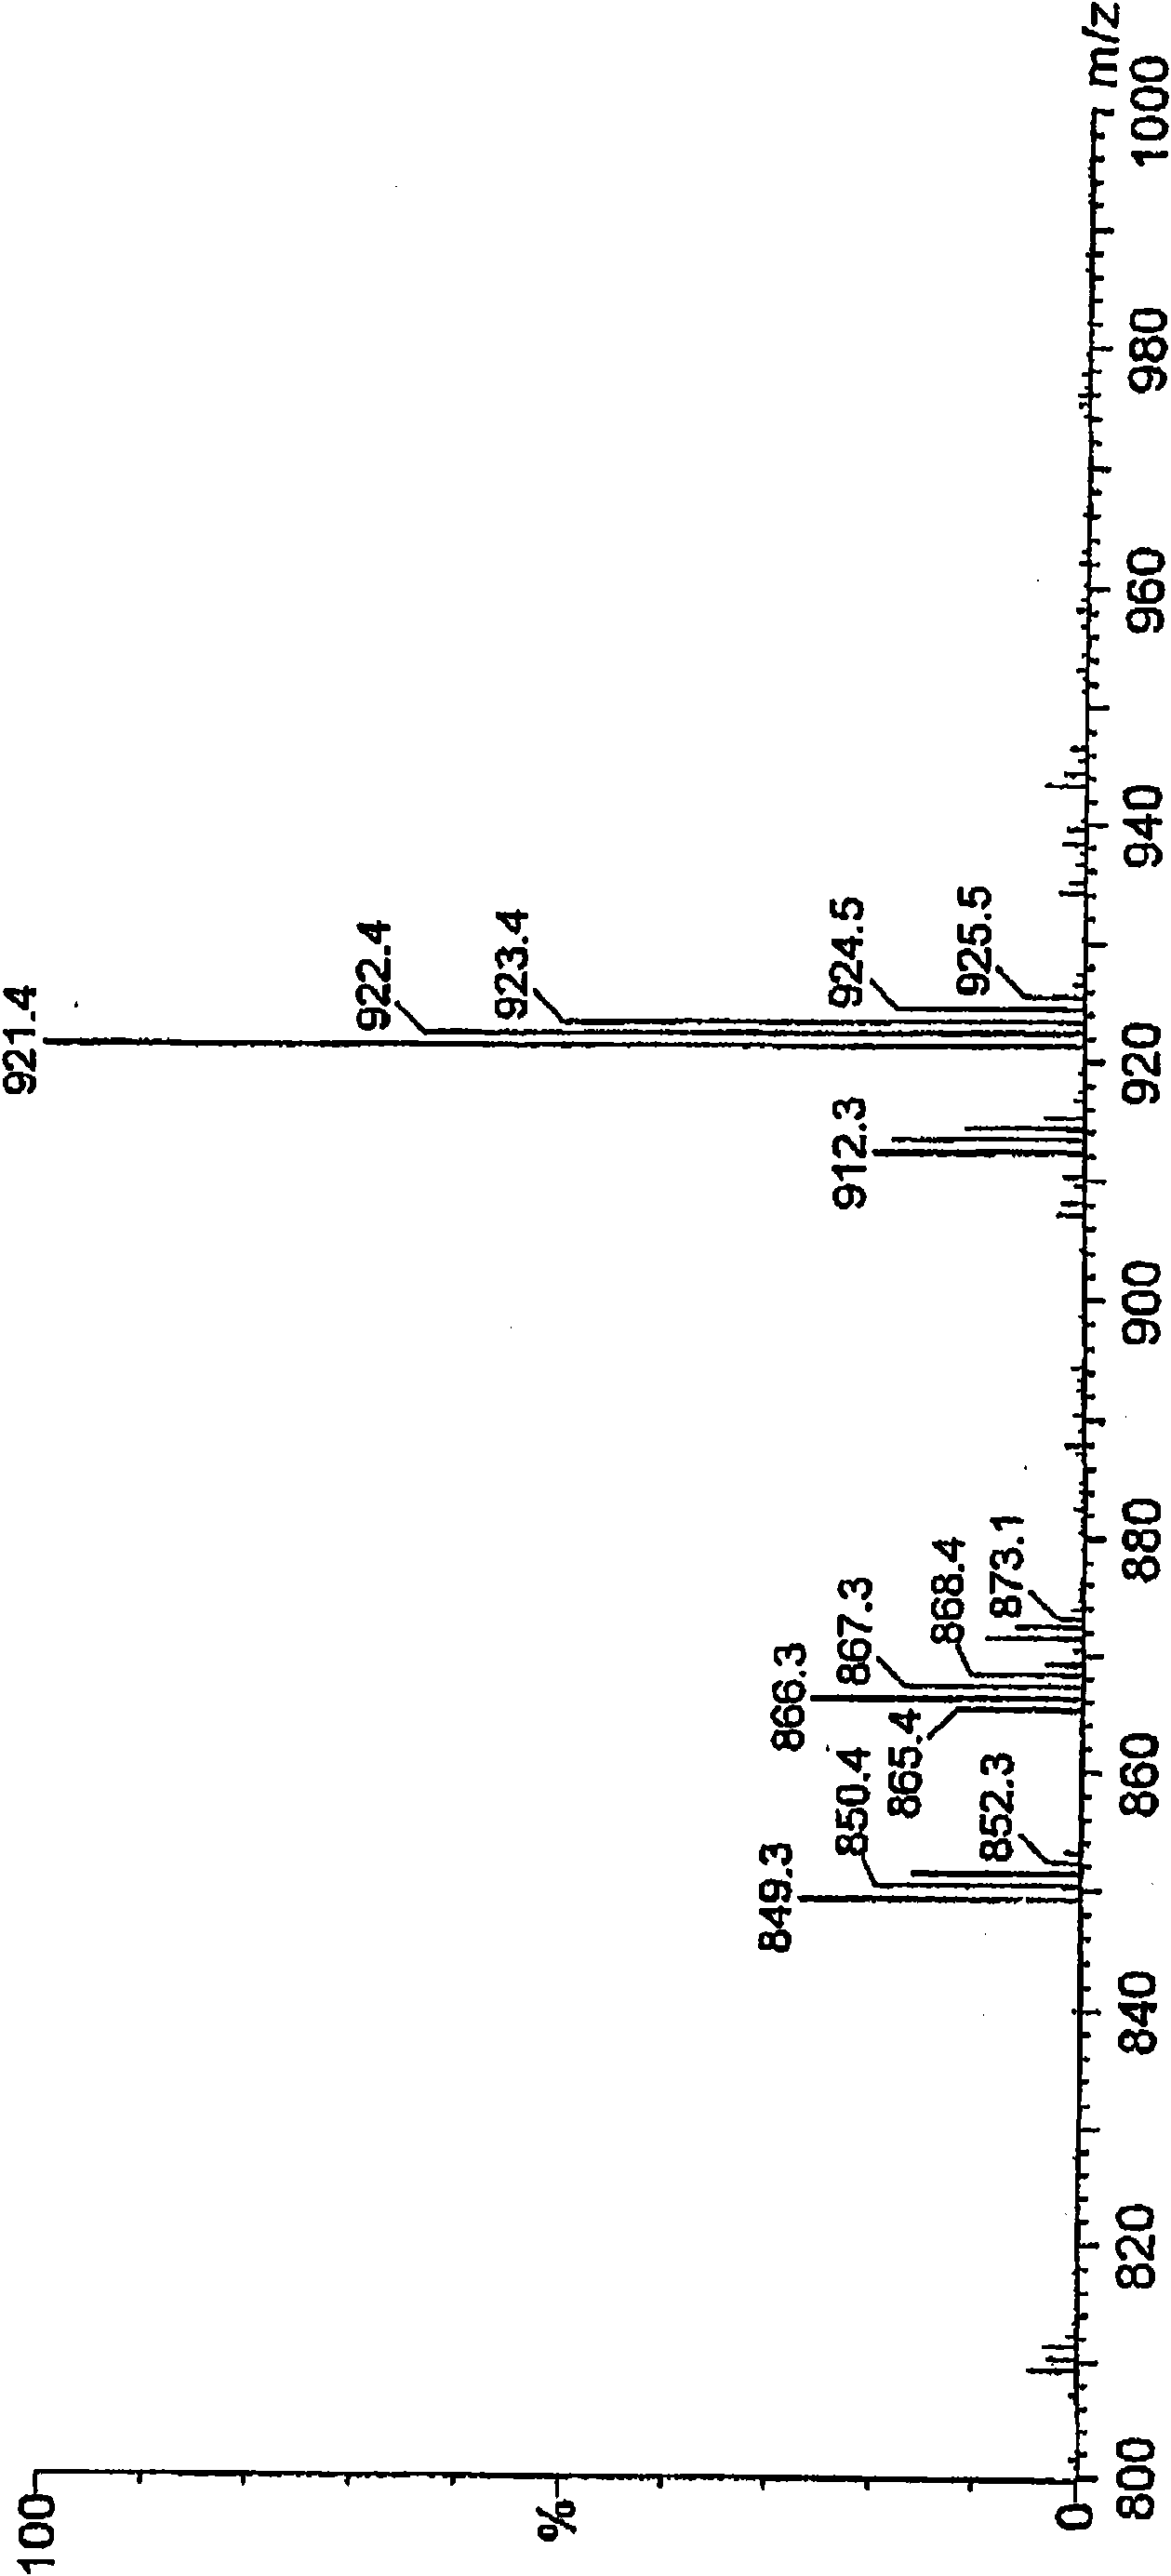 Process for production of oxidized cyclic phenol sulfide